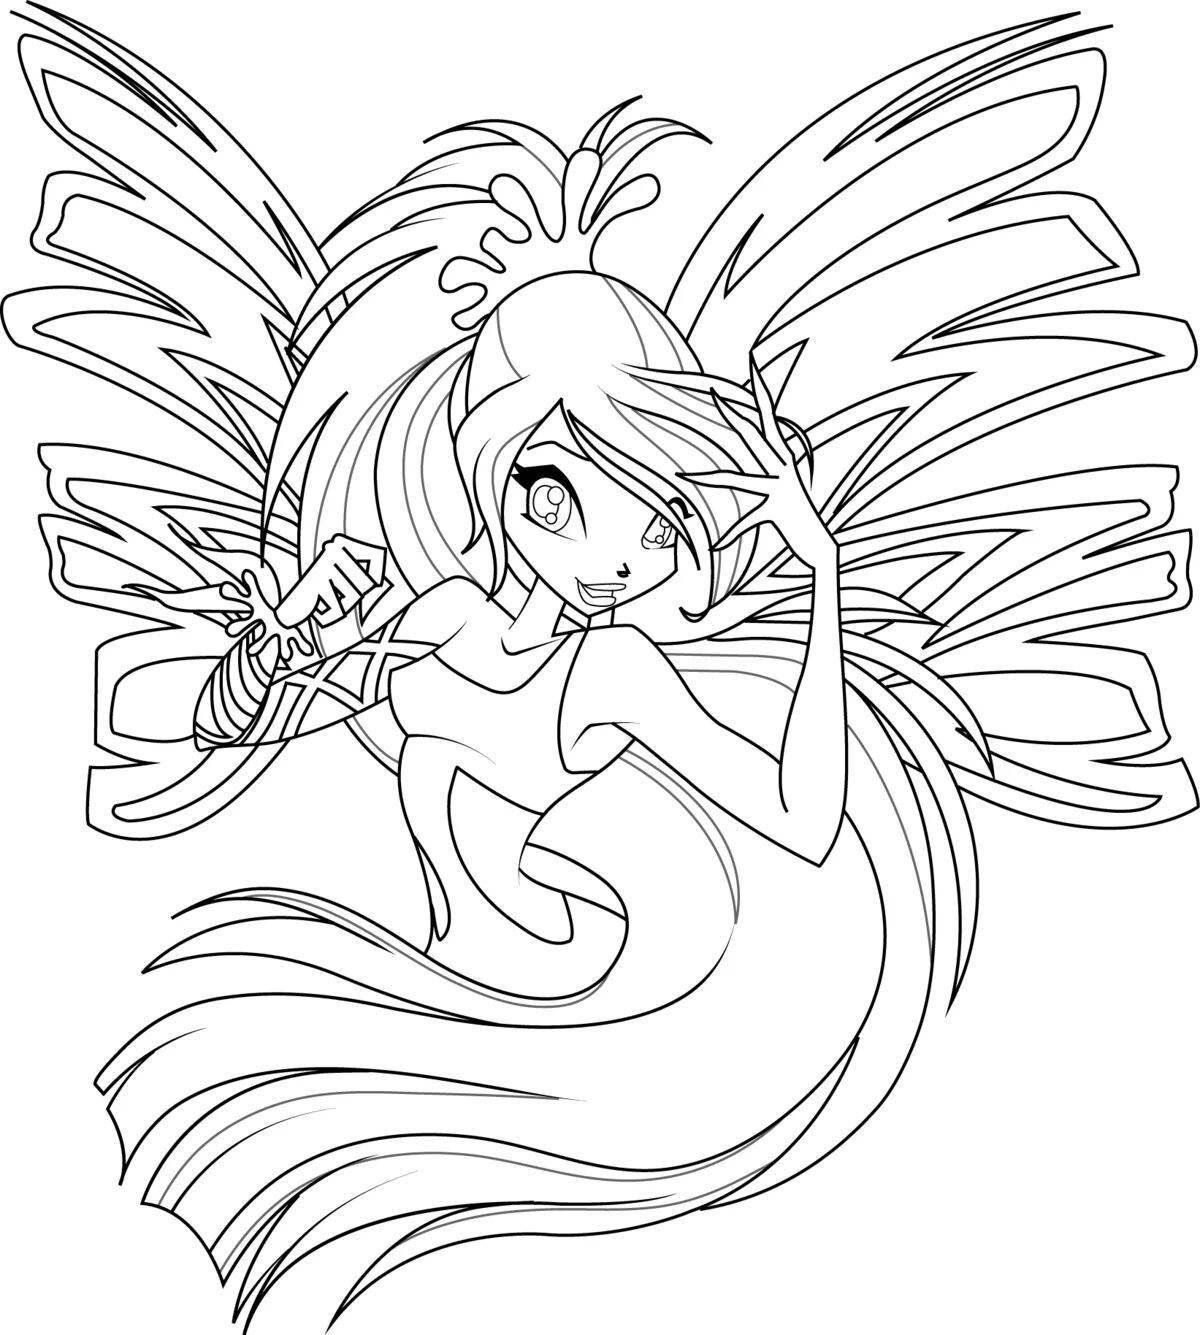 Charming winx bloom coloring book